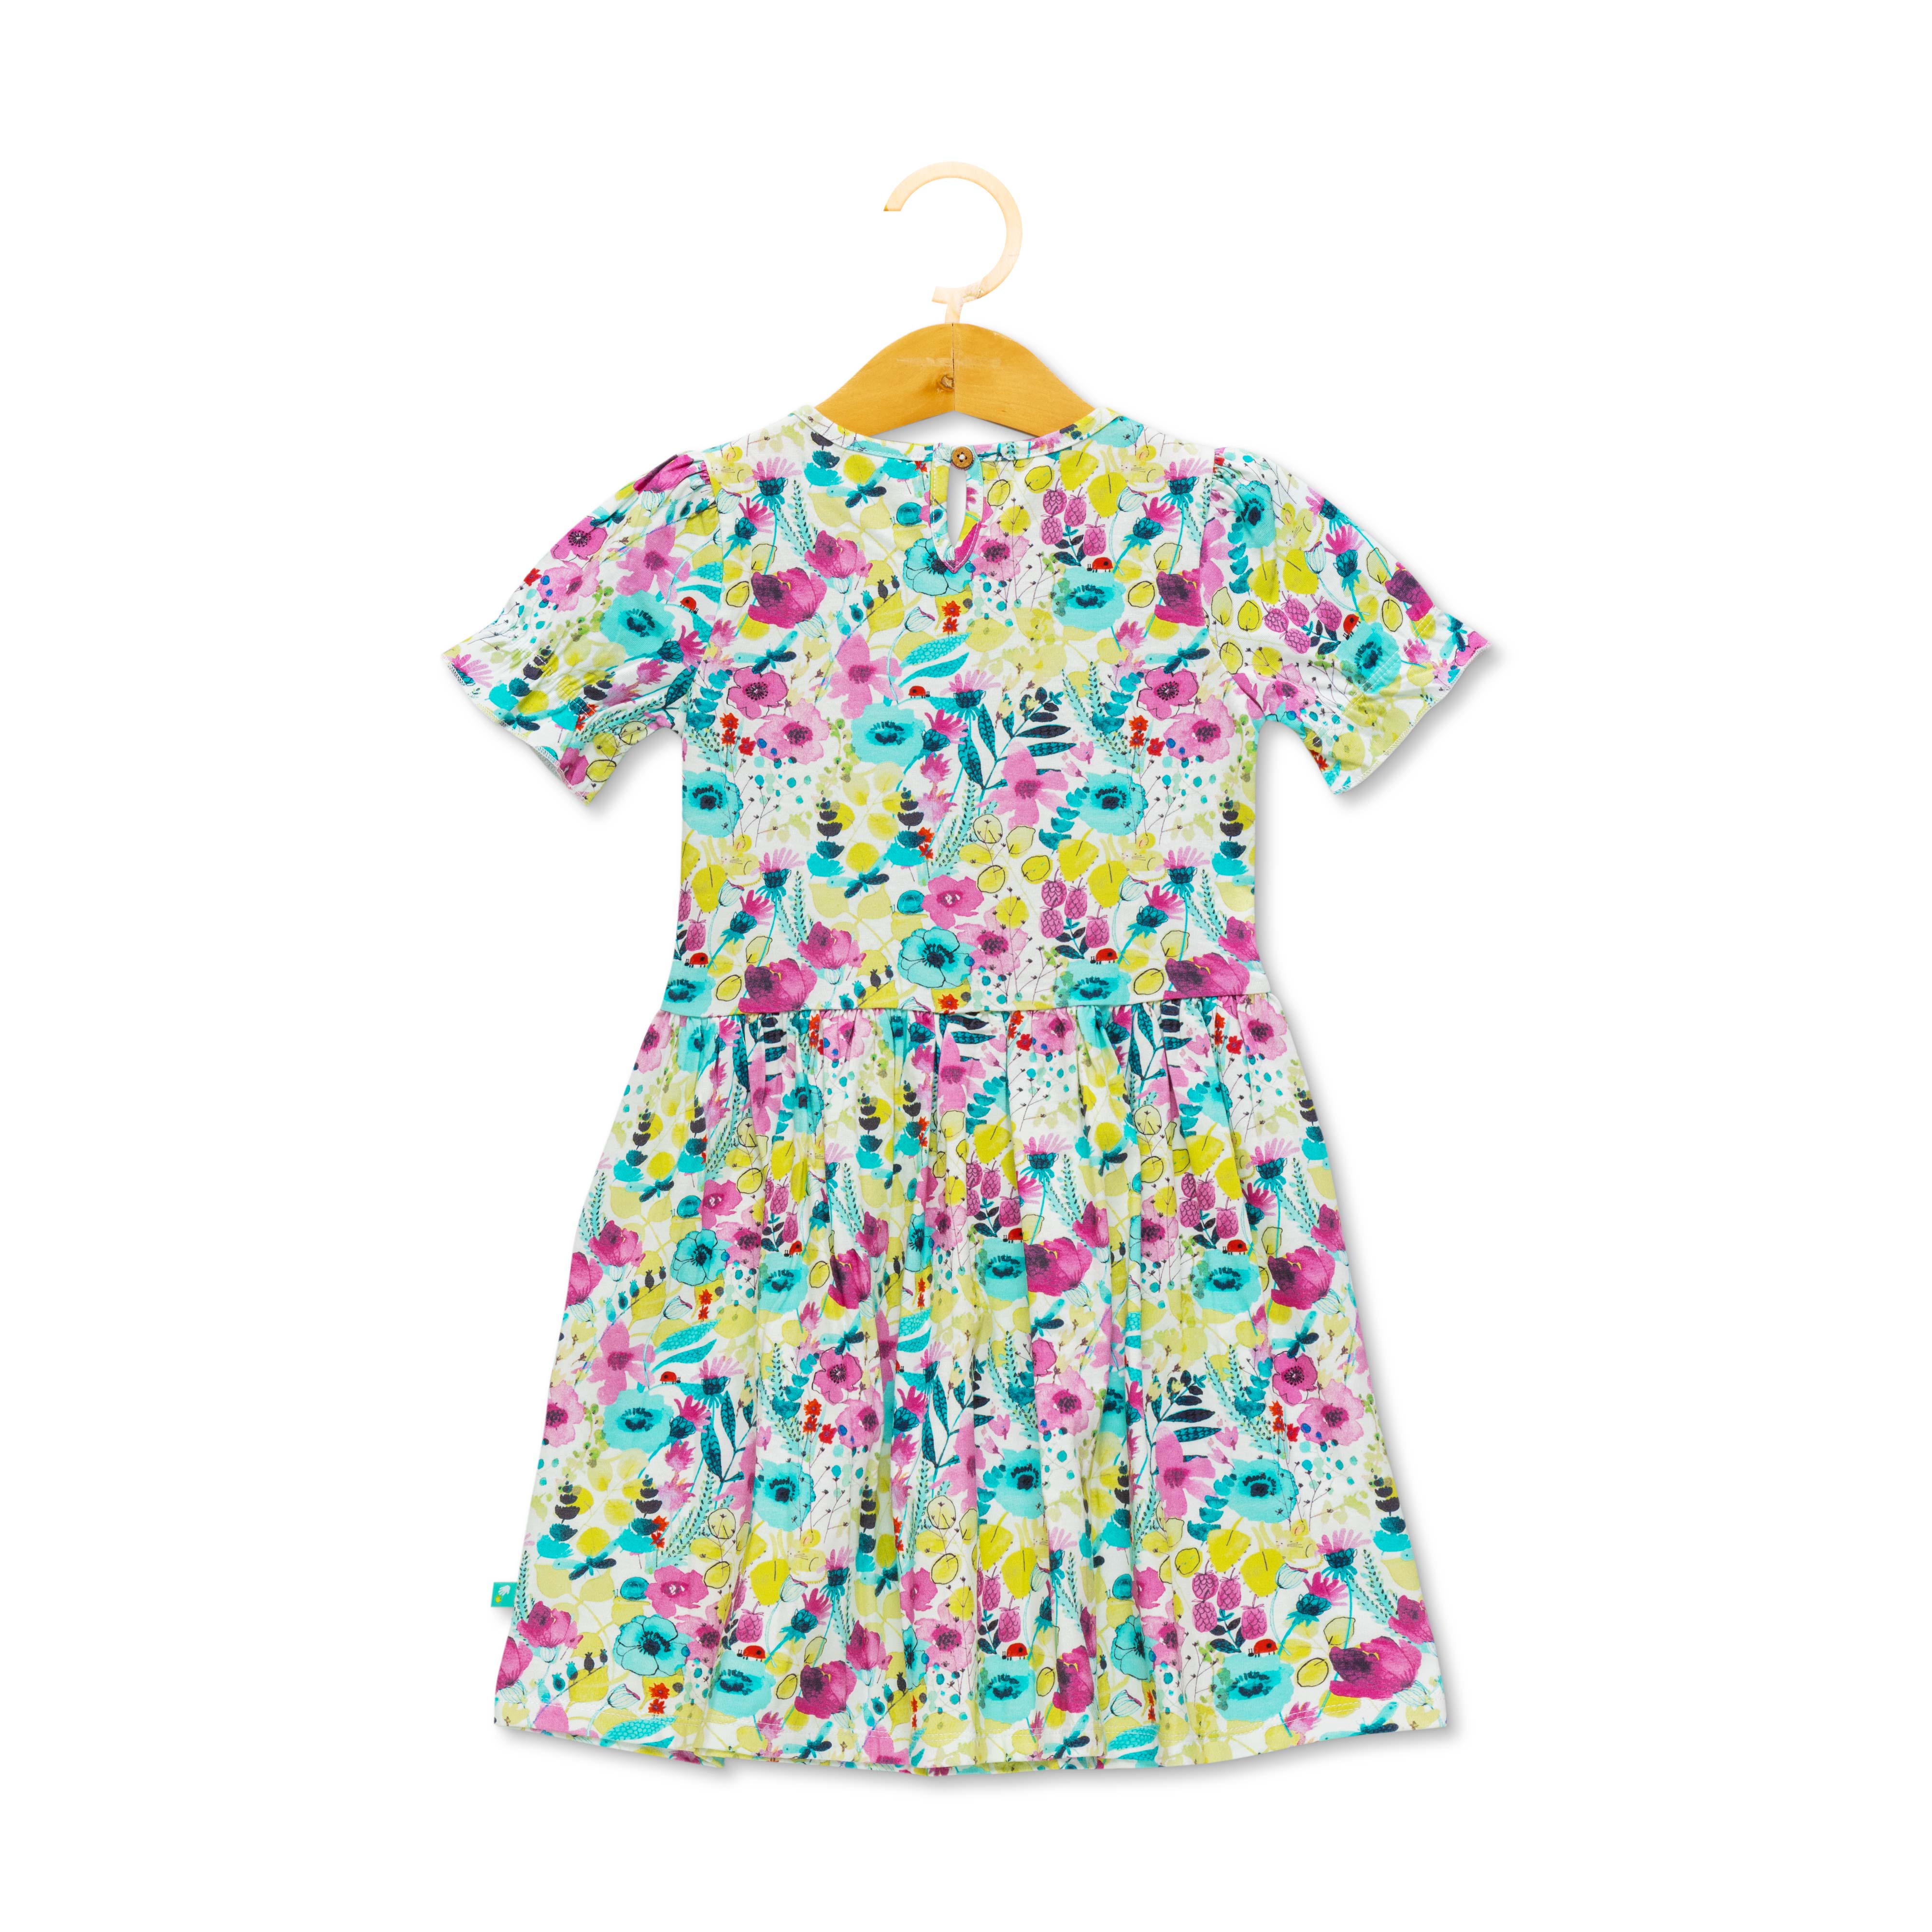 Girls Floral Printed Fit & Flare Dress - Off White